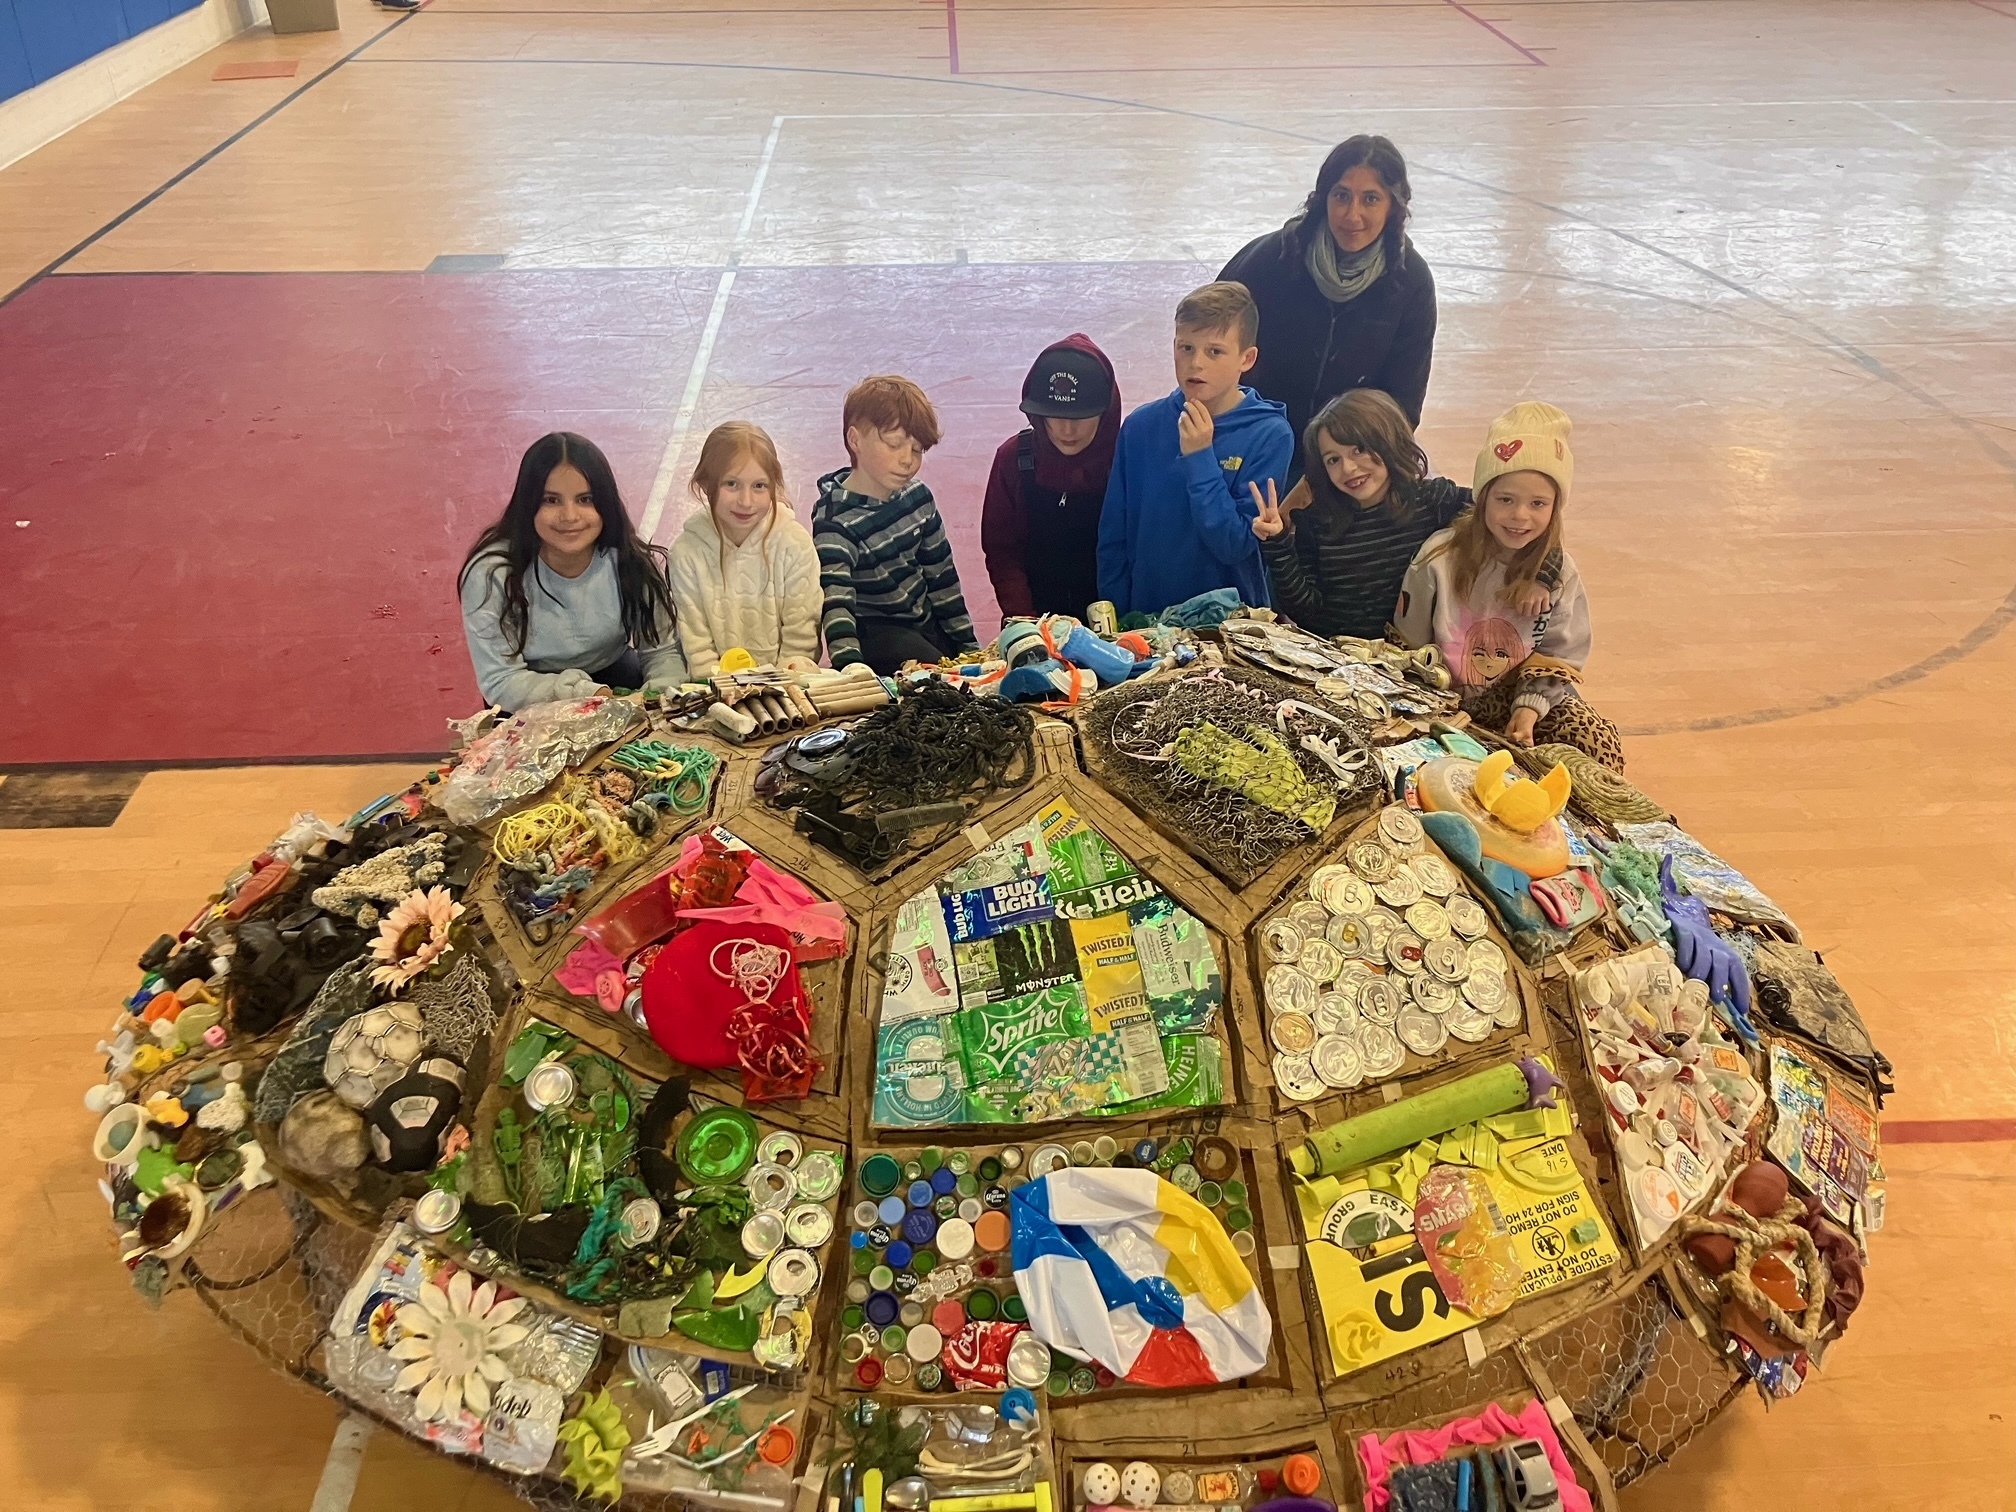 Students at the Hayground School created a sea turtle work of art, crafted from trash they collected at local beaches. It will be on display at the Parrish Art Museum on March 12.